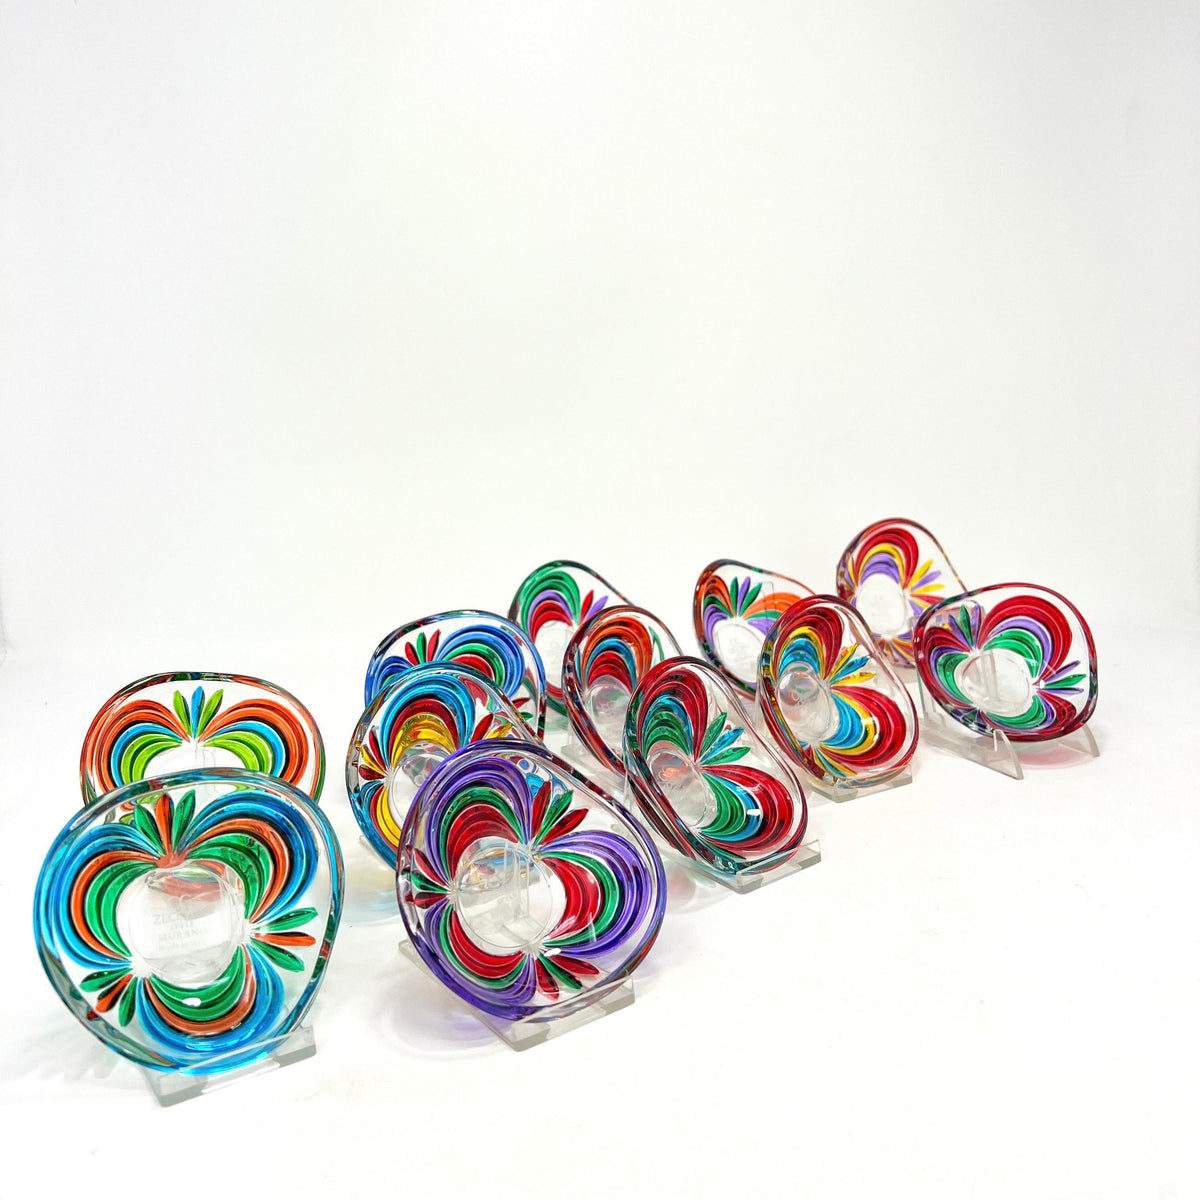 Rainbow Colored Glass Dishes, Assorted Colors, Hand-painted &amp; made in Italy at MyItalianDecor